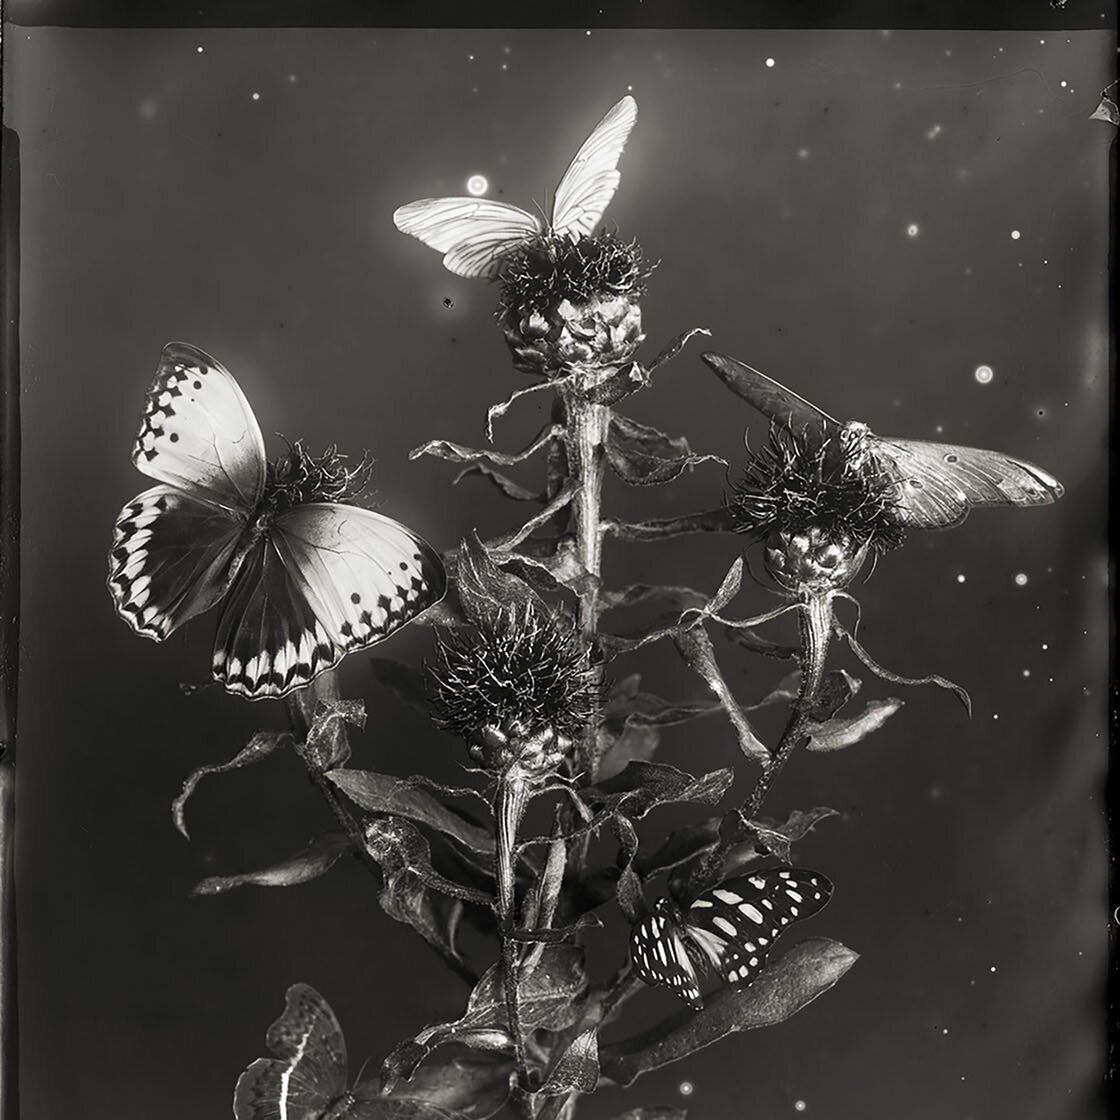   Whitney Lewis-Smith  Death of the Moth   ,  2014 Archival Pigment Ink Print on 100% Cotton Rag Paper 19 x 16 in Edition 4/20 Jennifer Kostuik Gallery 